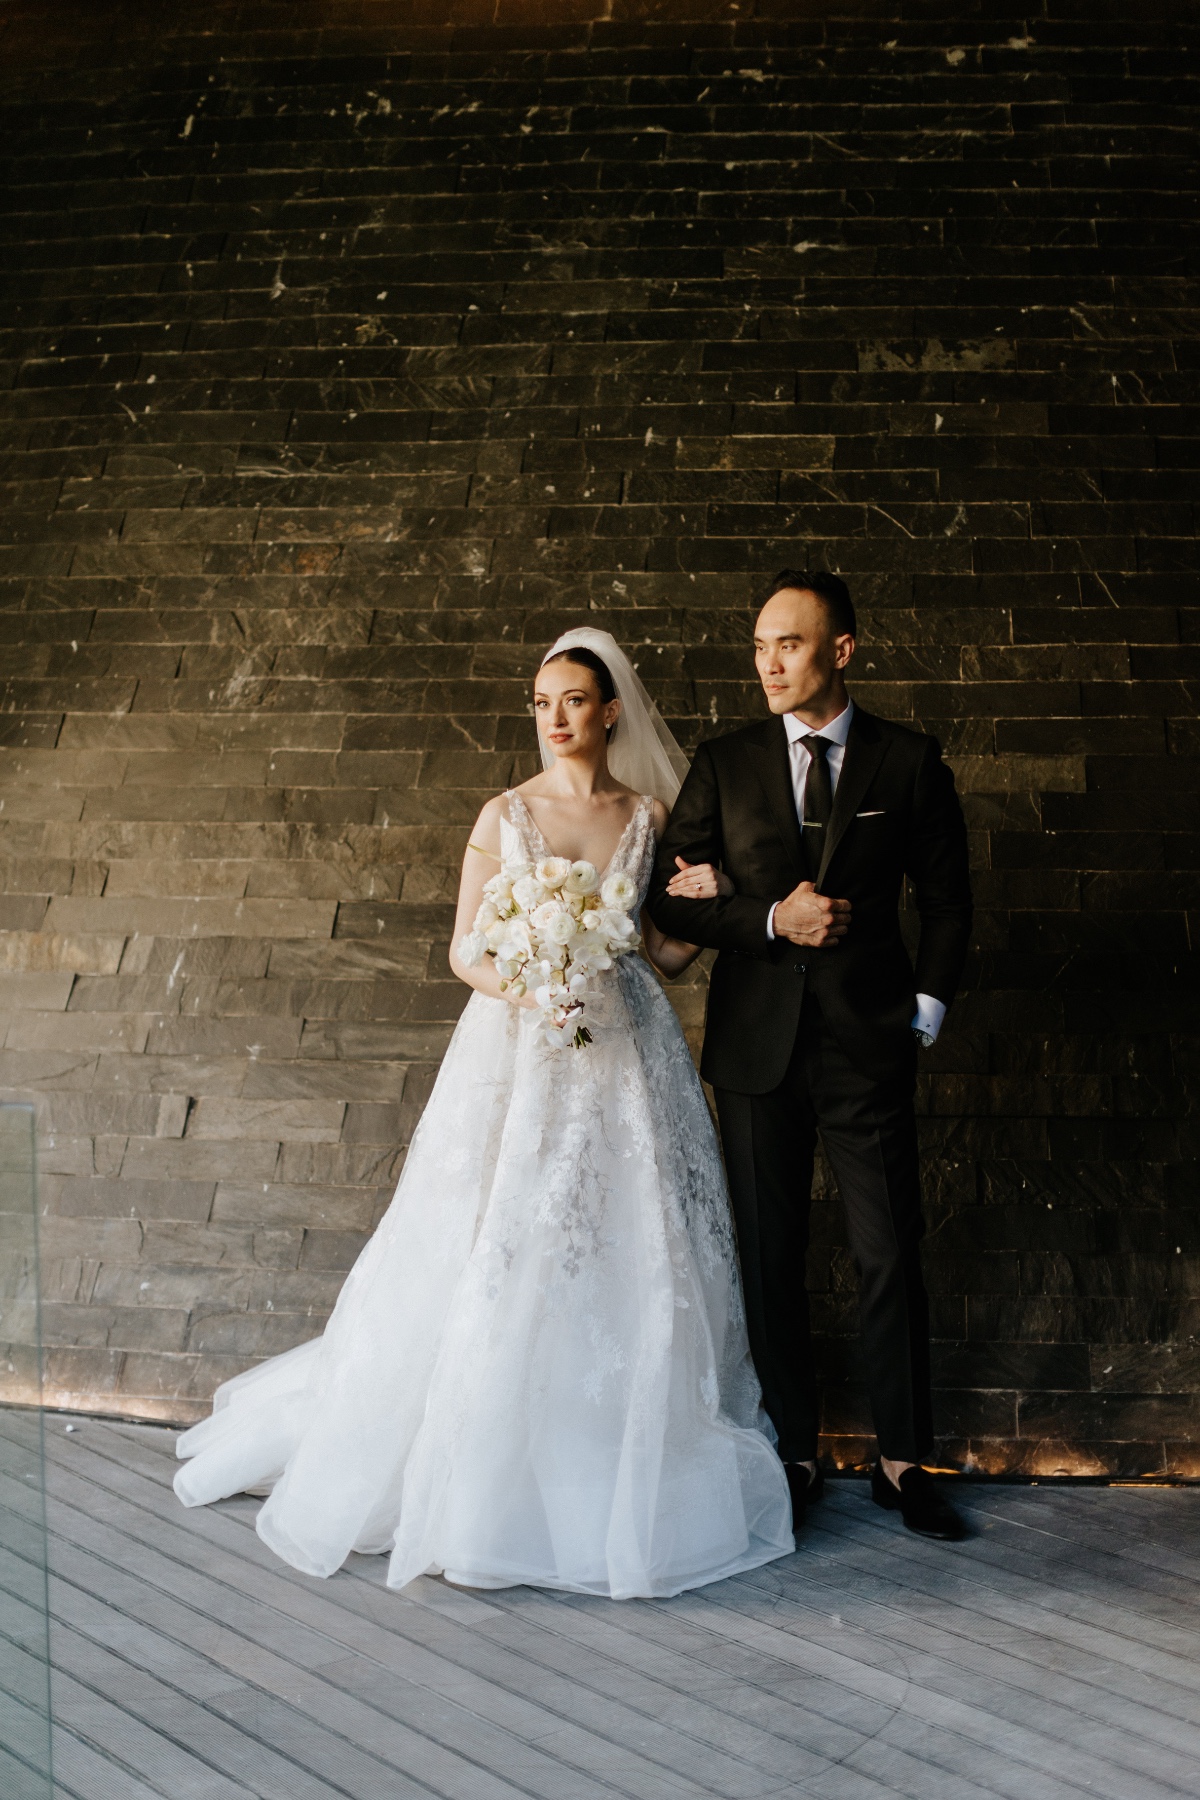 Portrait of bride and groom against brick wall